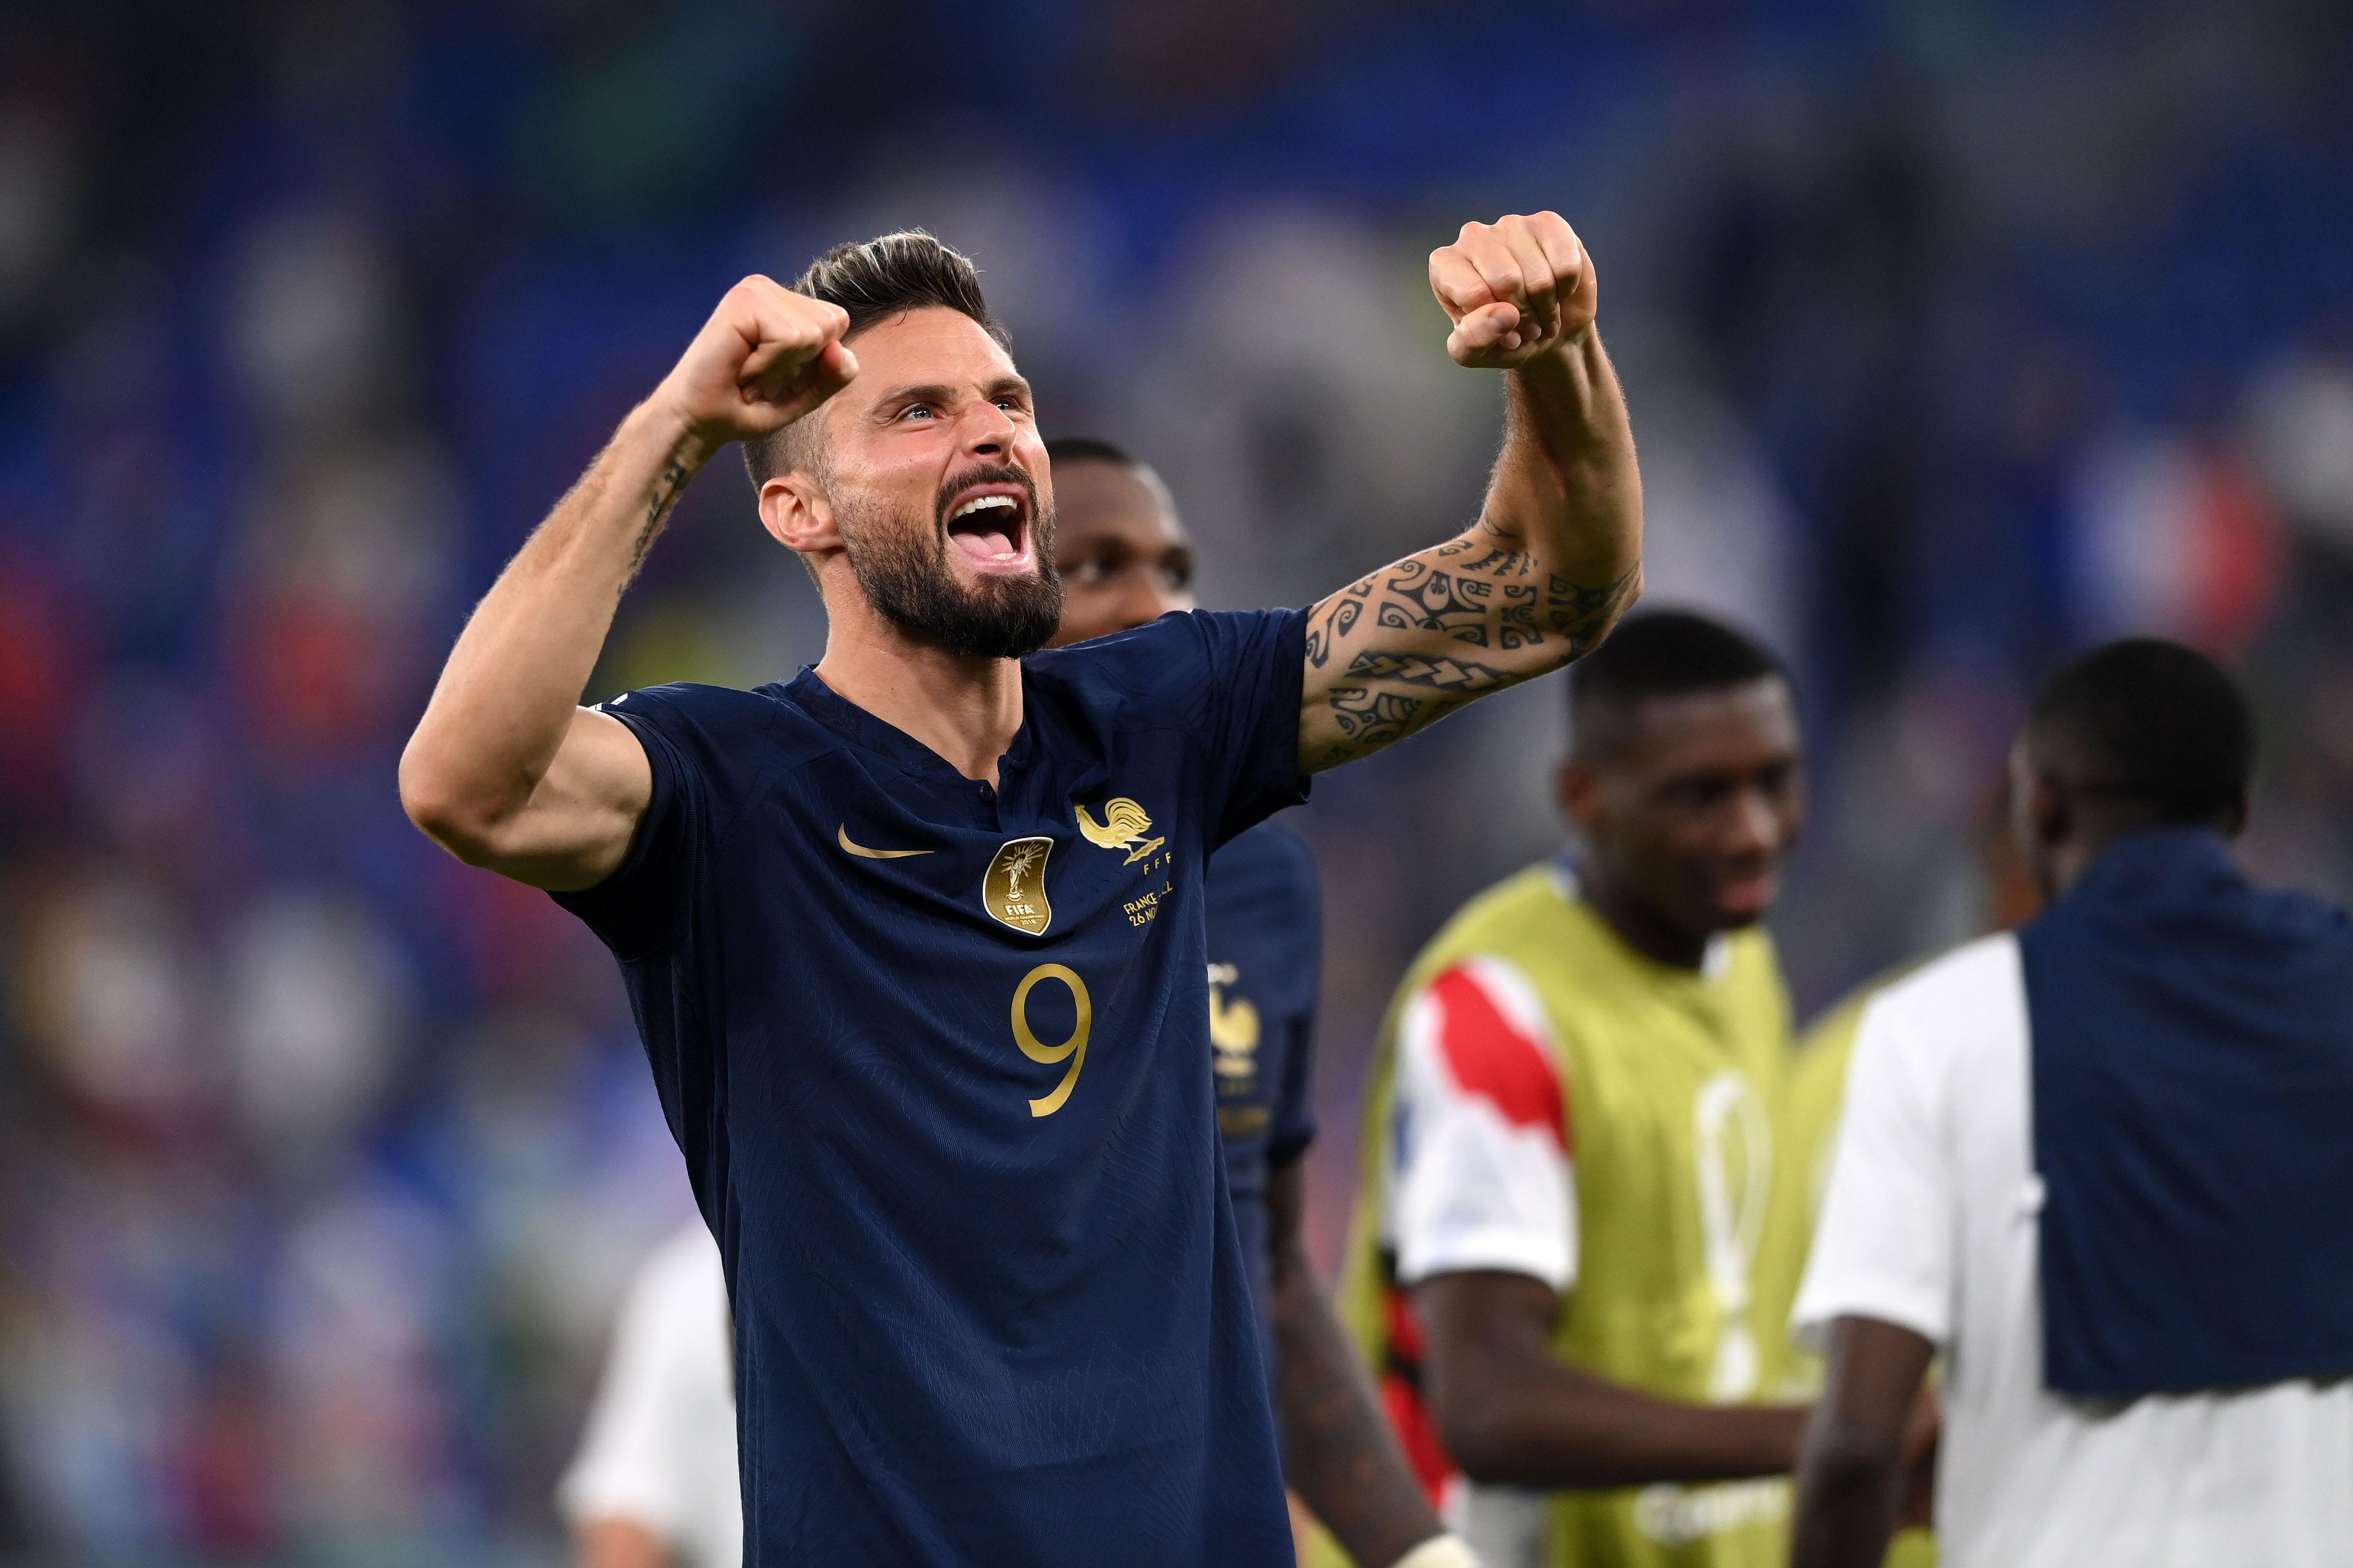 Olivier Giroud of France celebrates after the 2-1 win during the FIFA World Cup Qatar 2022 Group D match between France and Denmark at Stadium 974 on November 26, 2022 in Doha, Qatar